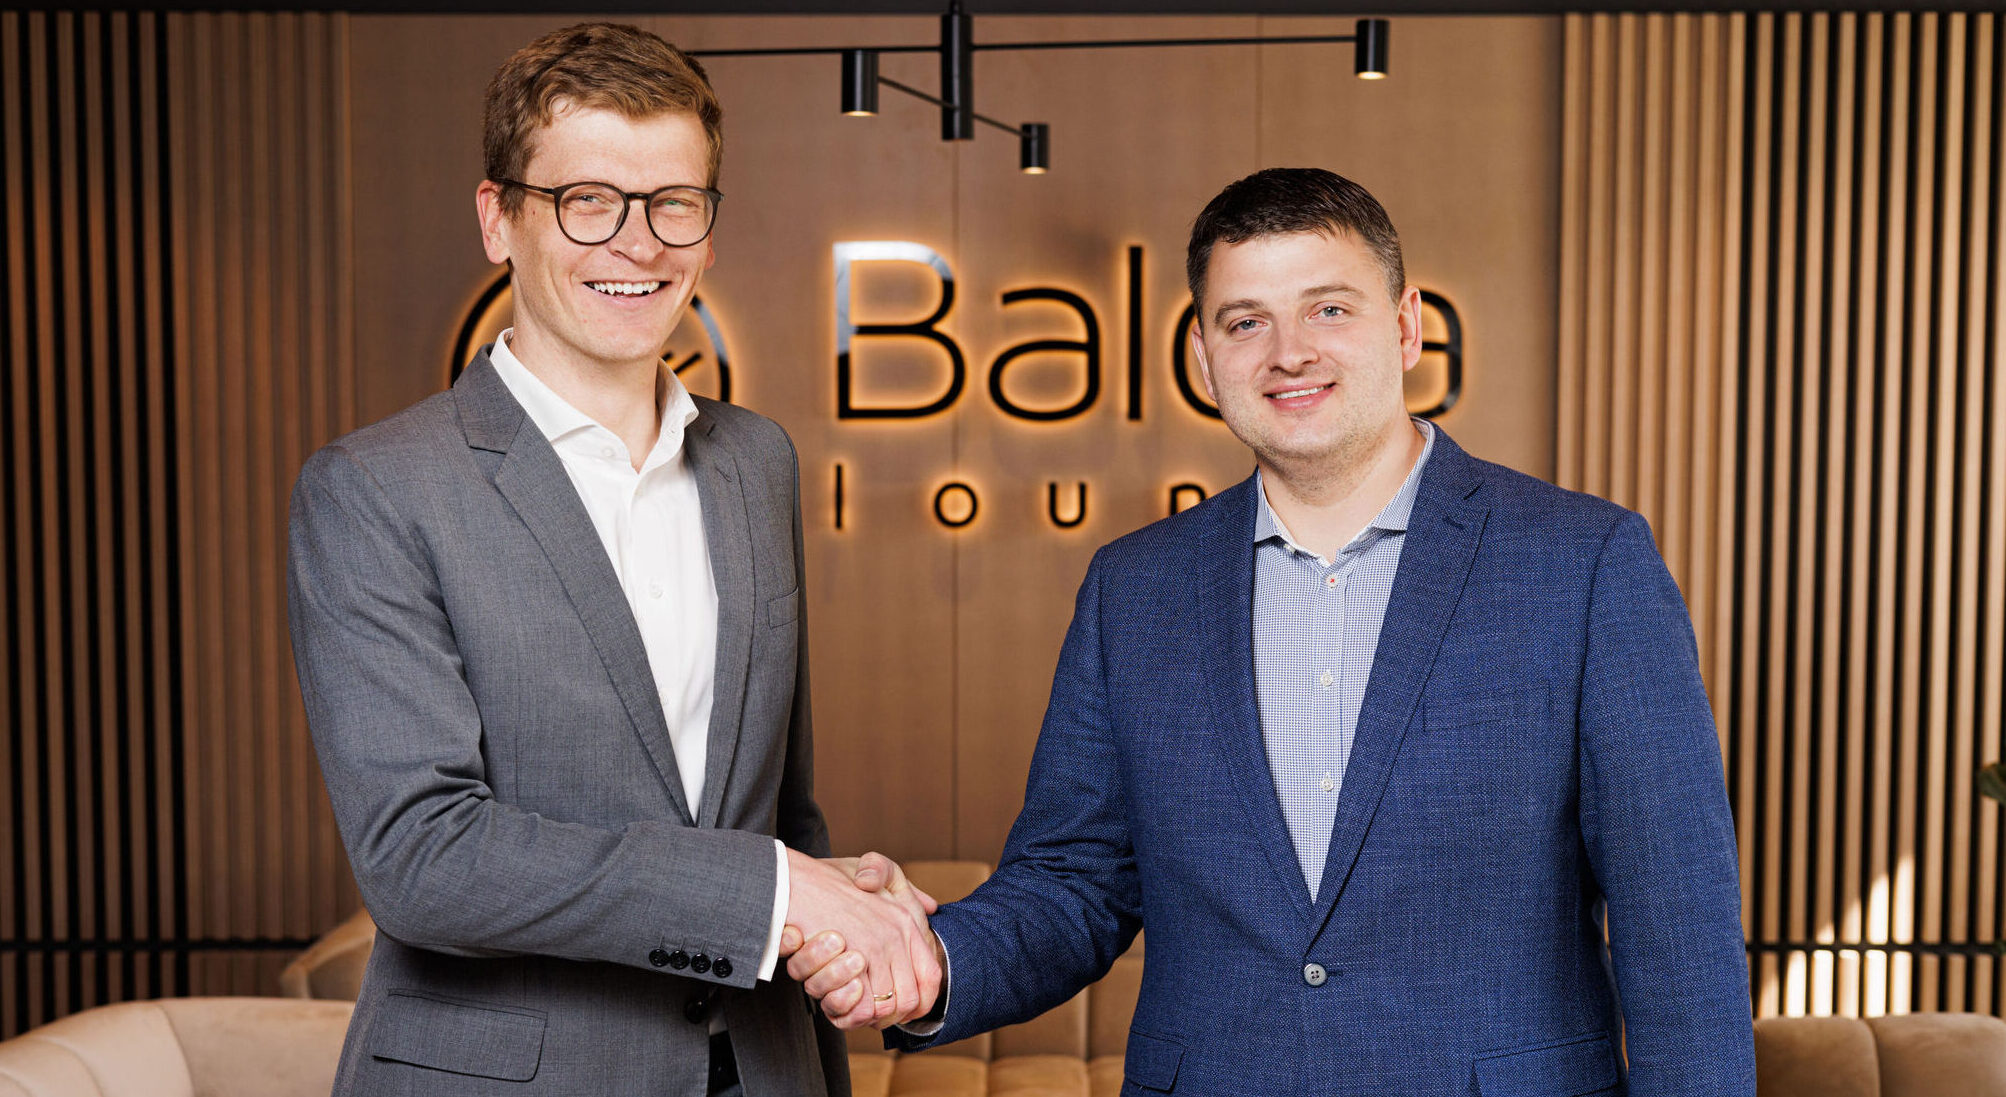 Insurer Balcia invests 1 million euros in the Merito Partners investment fund 